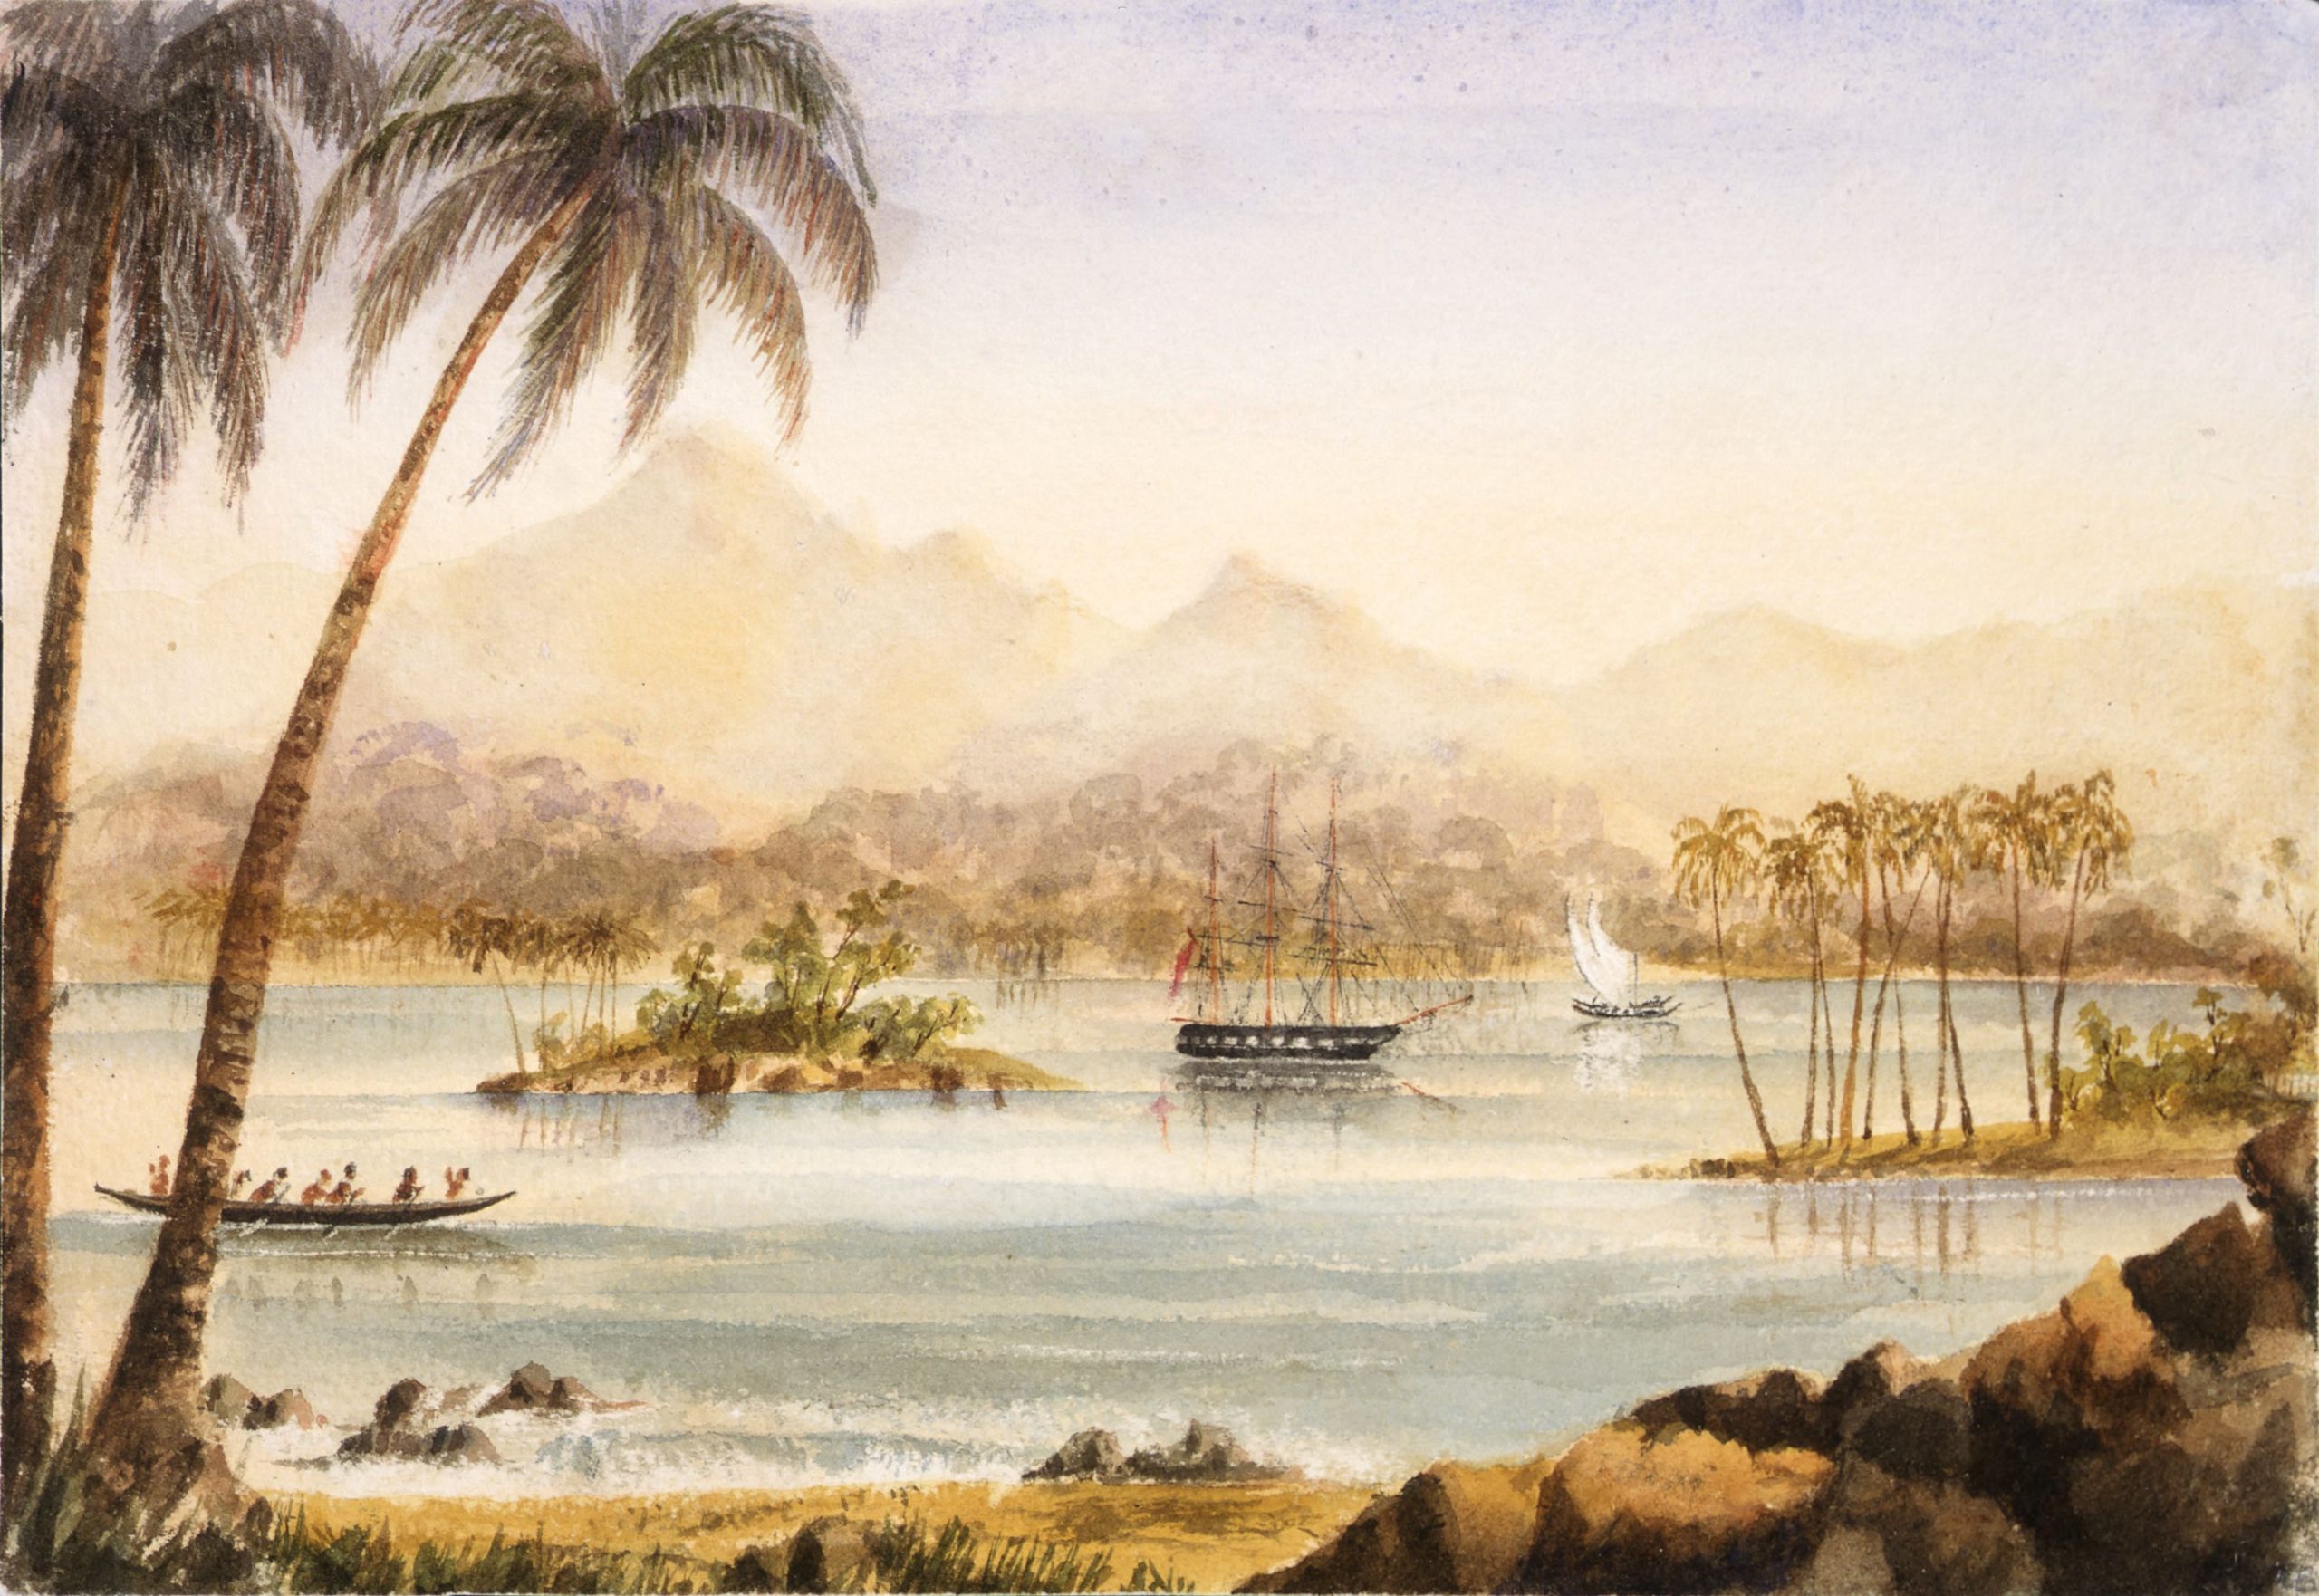 A landscape view of a bay with small islands and sailboats